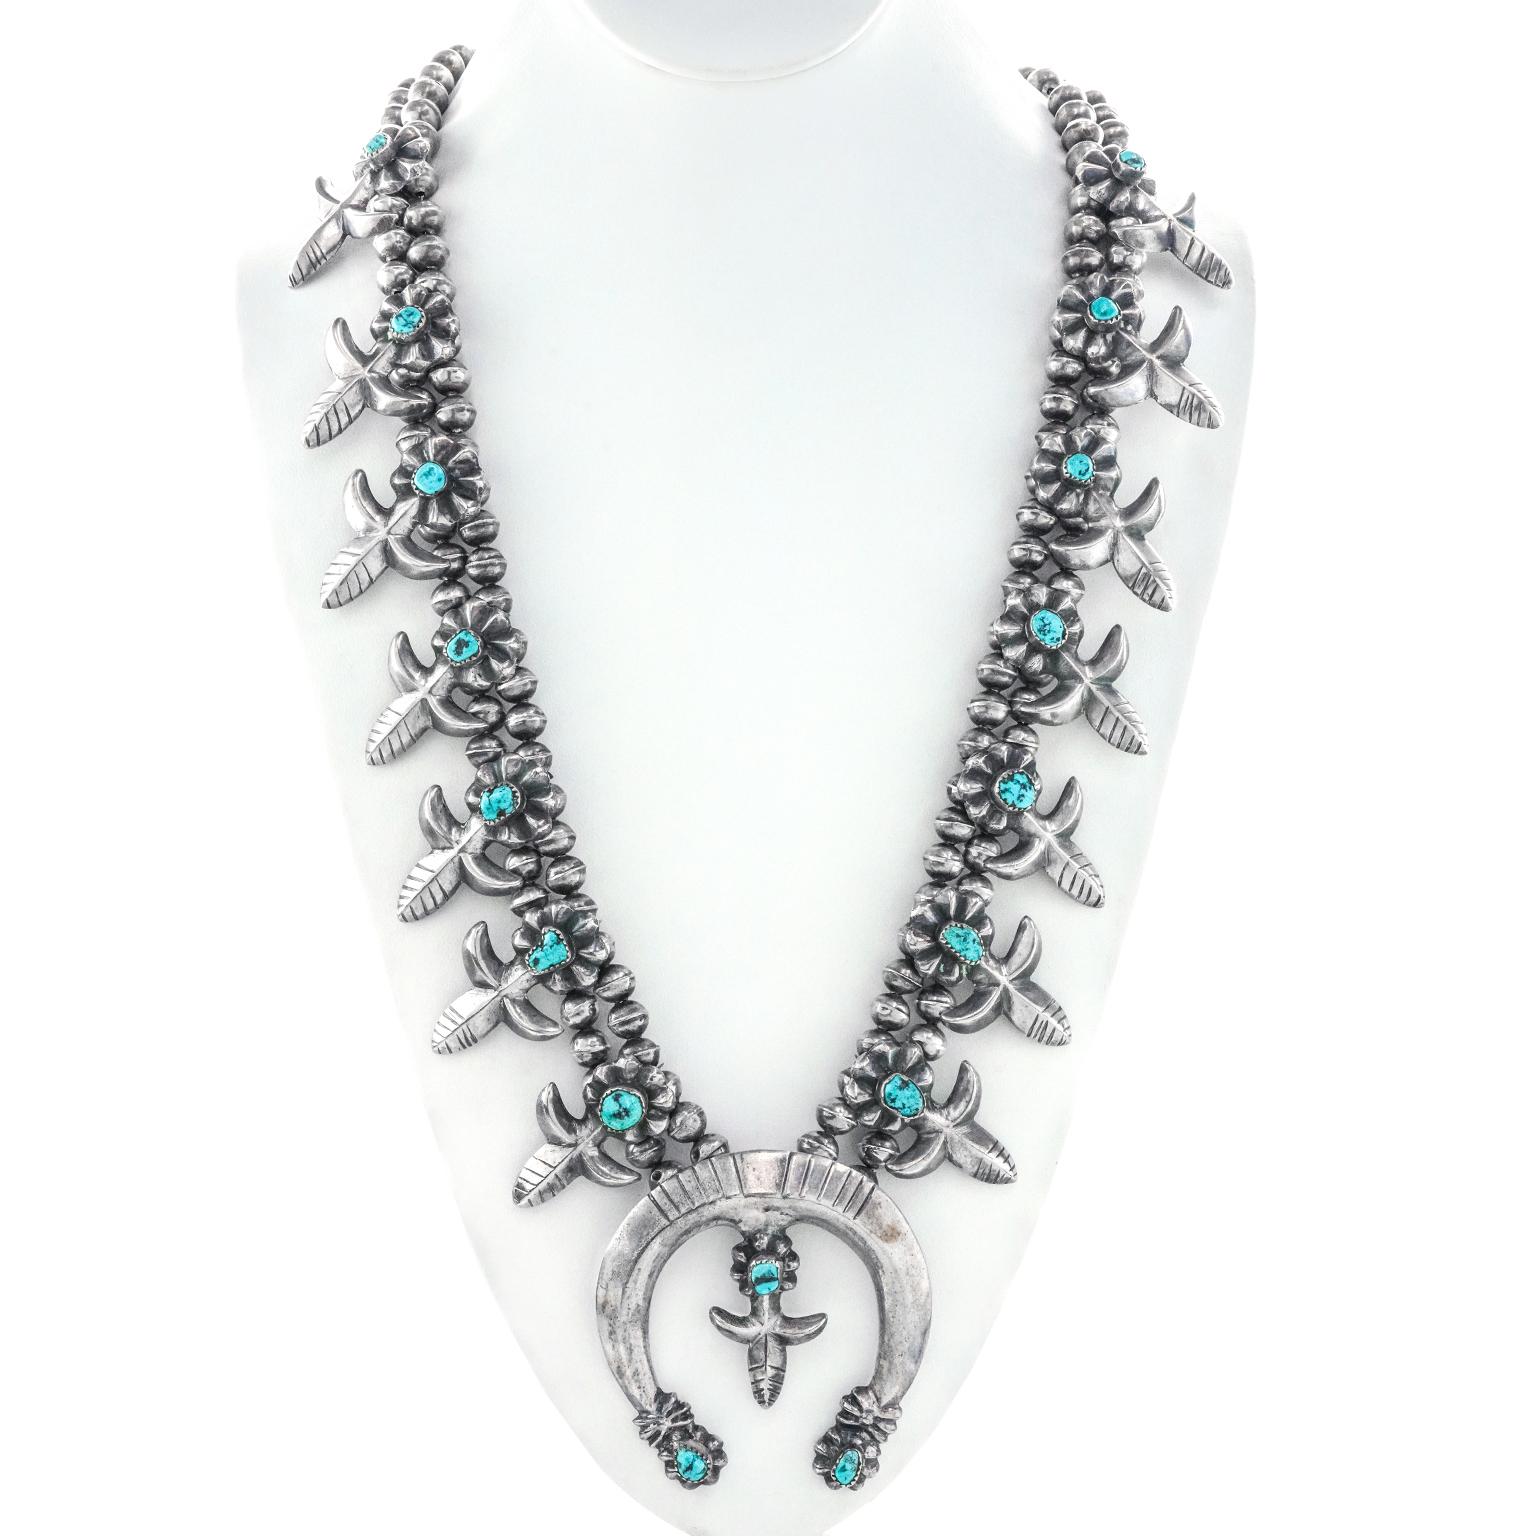 Circa 1970s, Sterling, by Nellie Tso, Navajo.   A marvelous example of Navajo silver smithing, this large turquoise-set squash blossom necklace has it all -- color, quality, and size. Made by Nellie Tso, the look is iconic Western Americana at its